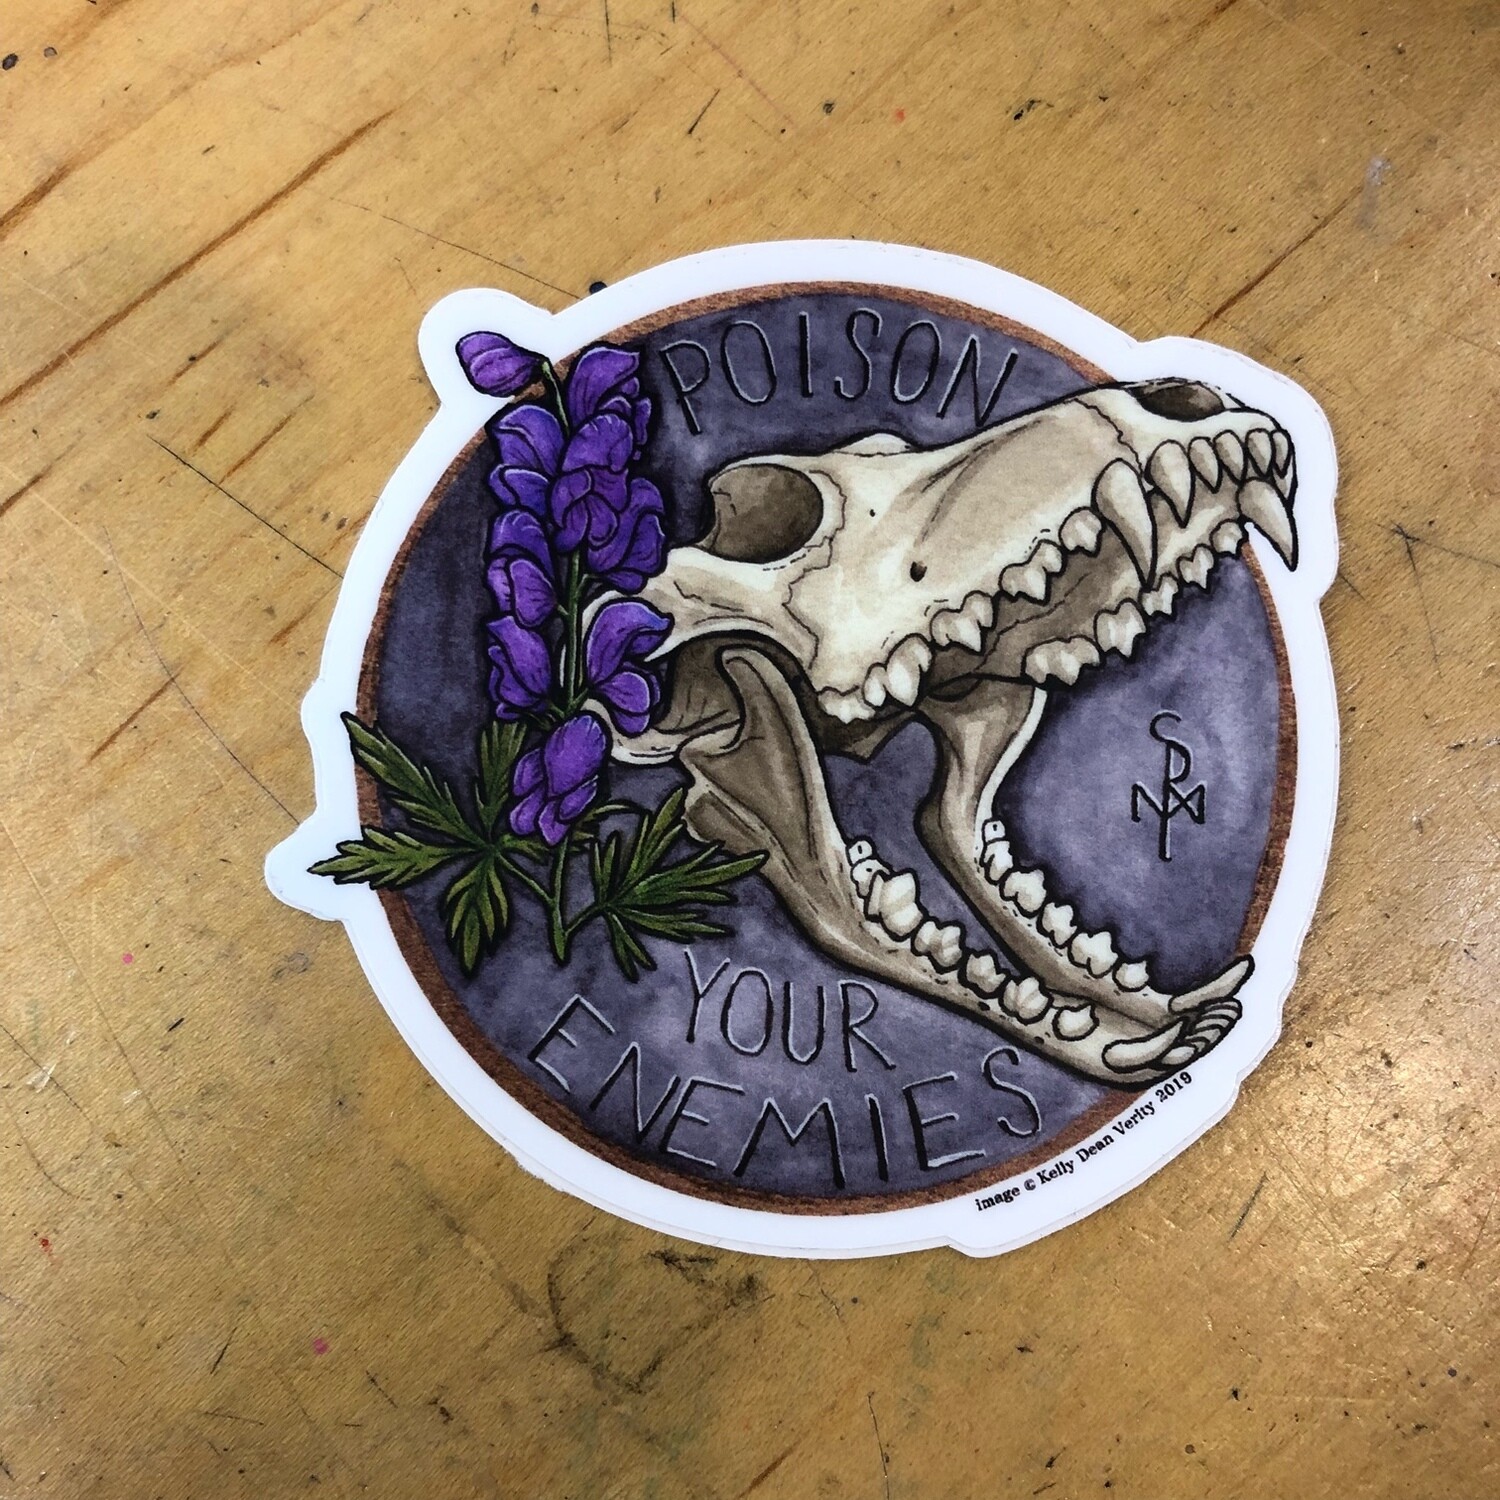 Poison Your Enemies - Sticker by Kelly Dean Verity